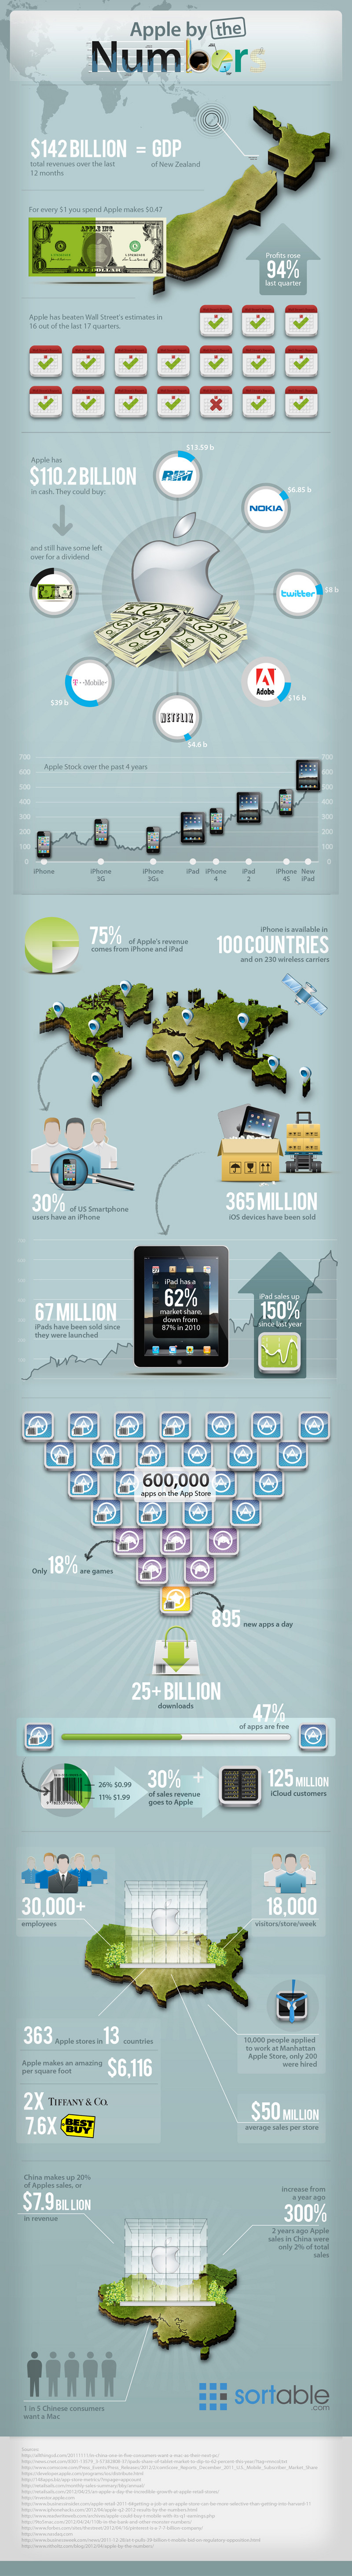 Apple by the numbers